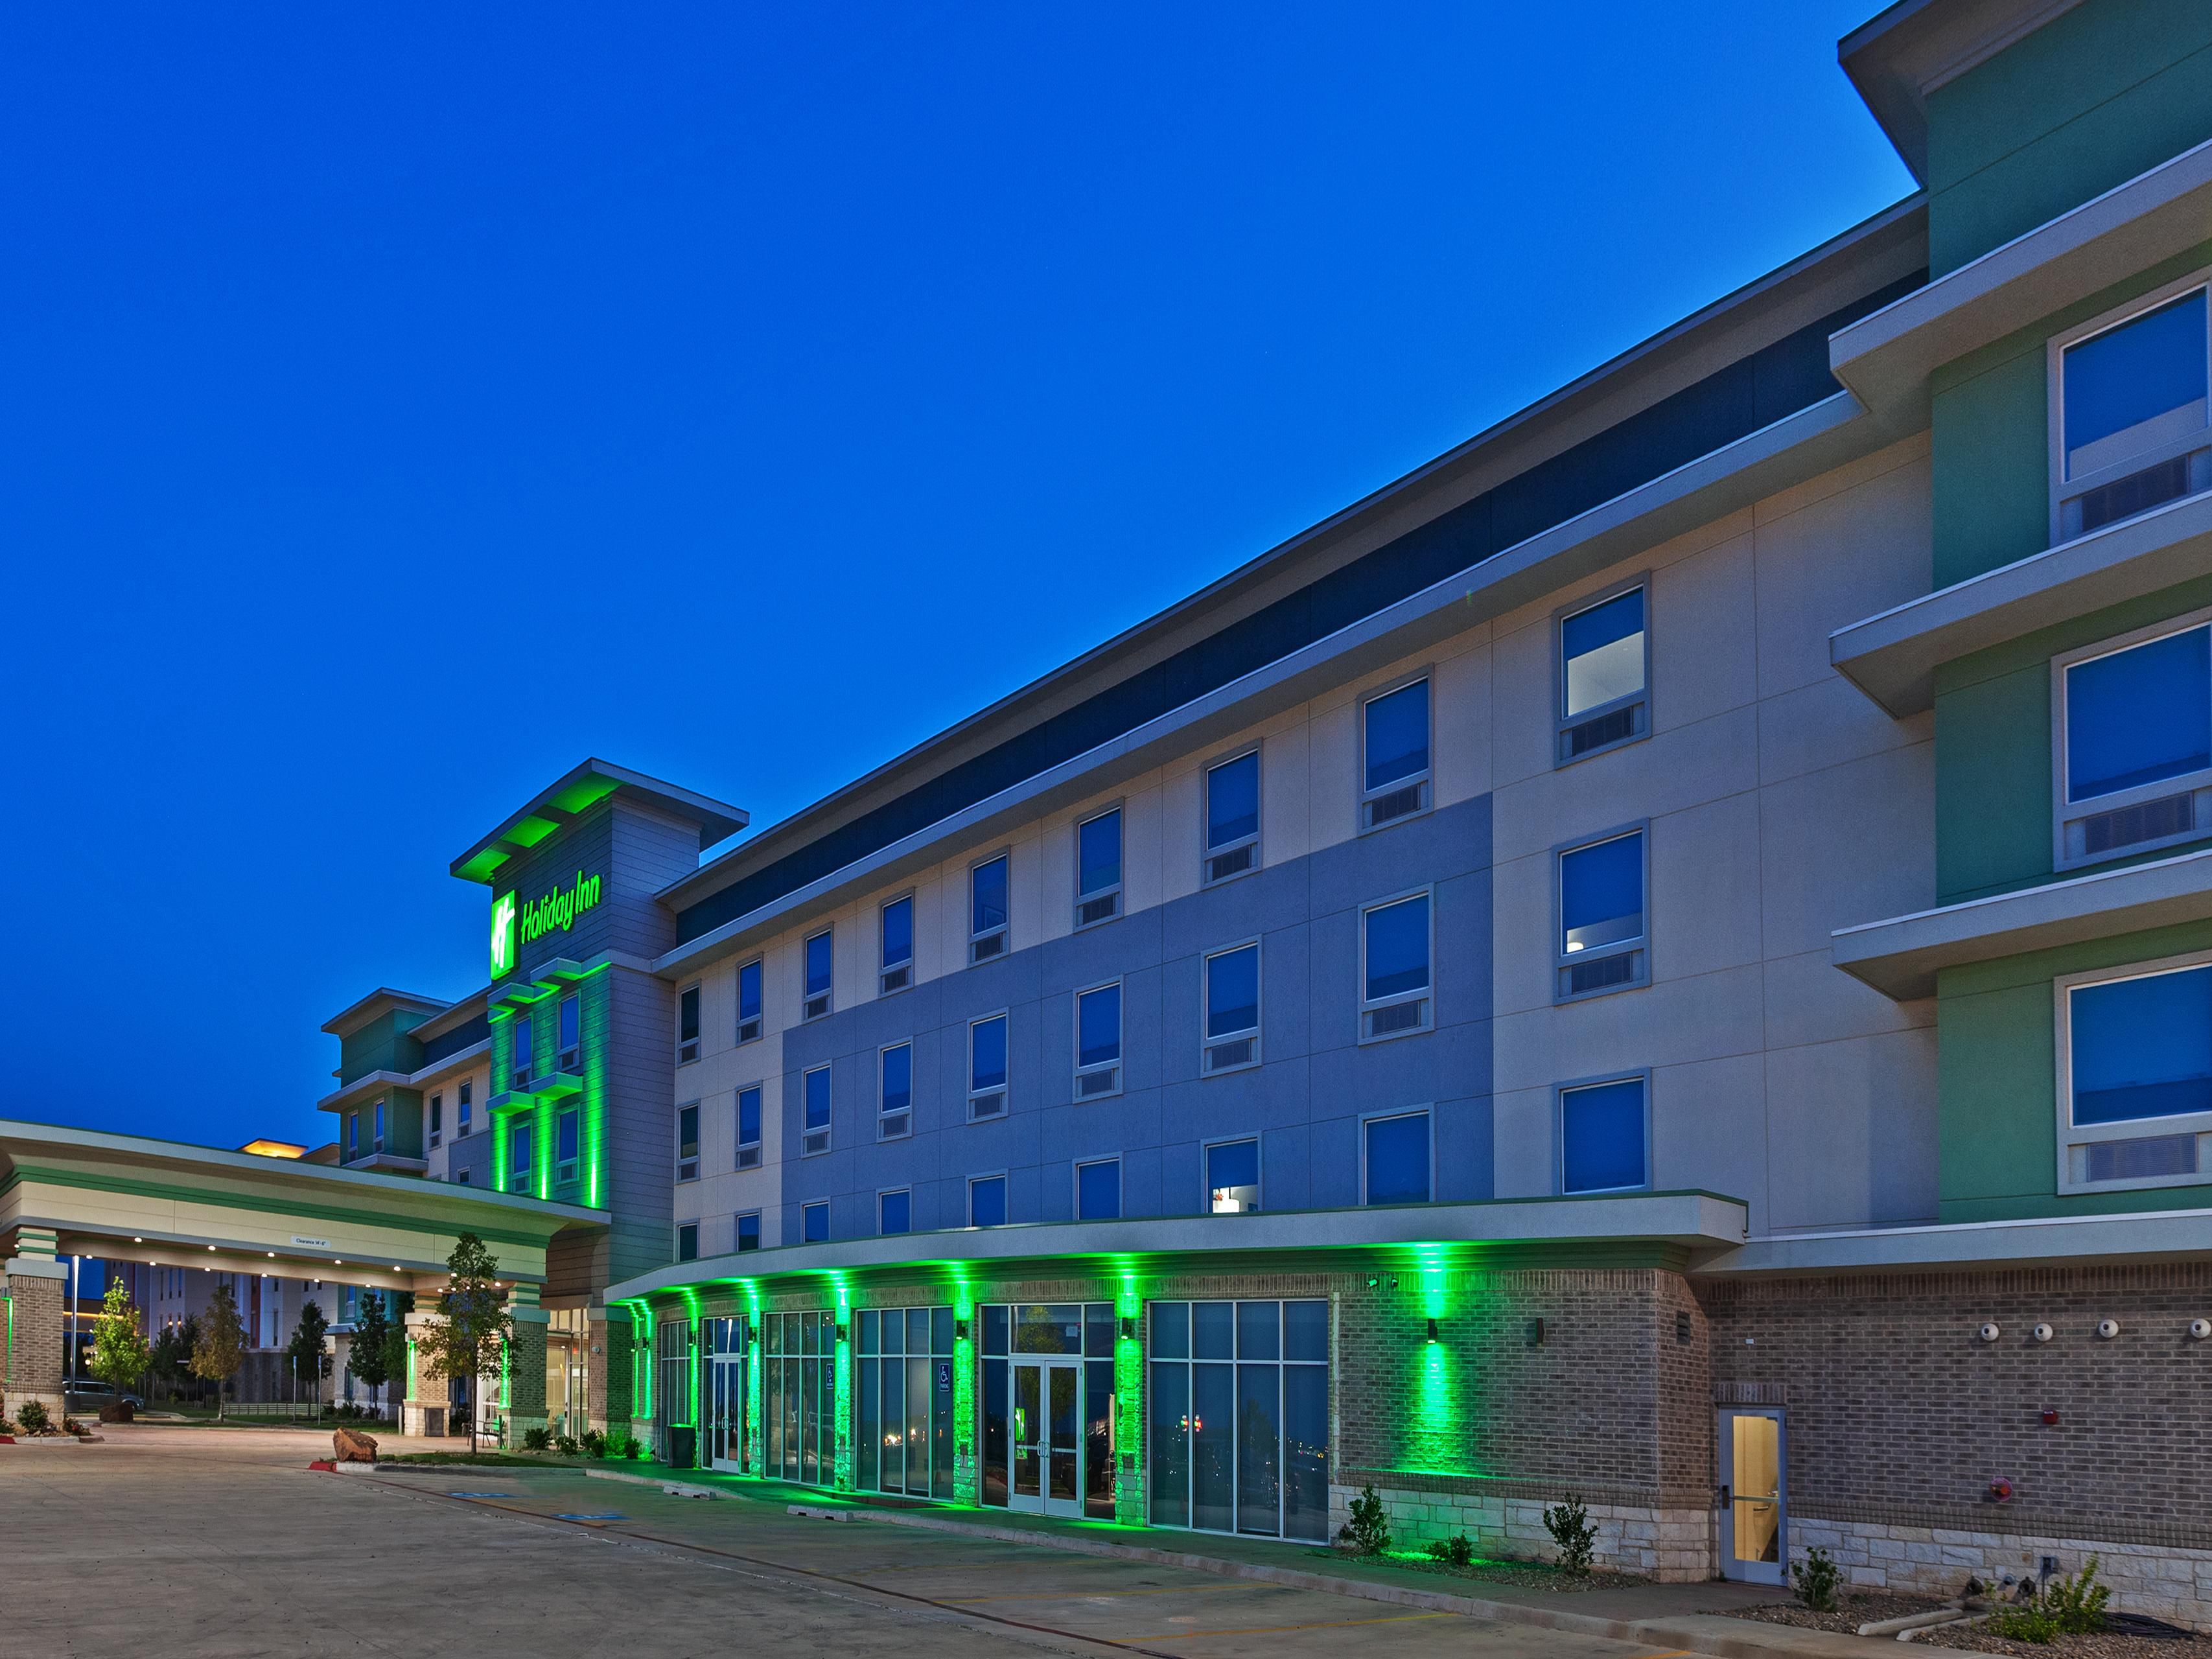 Candlewood Suites Amarillo Extended Stay Hotels - 